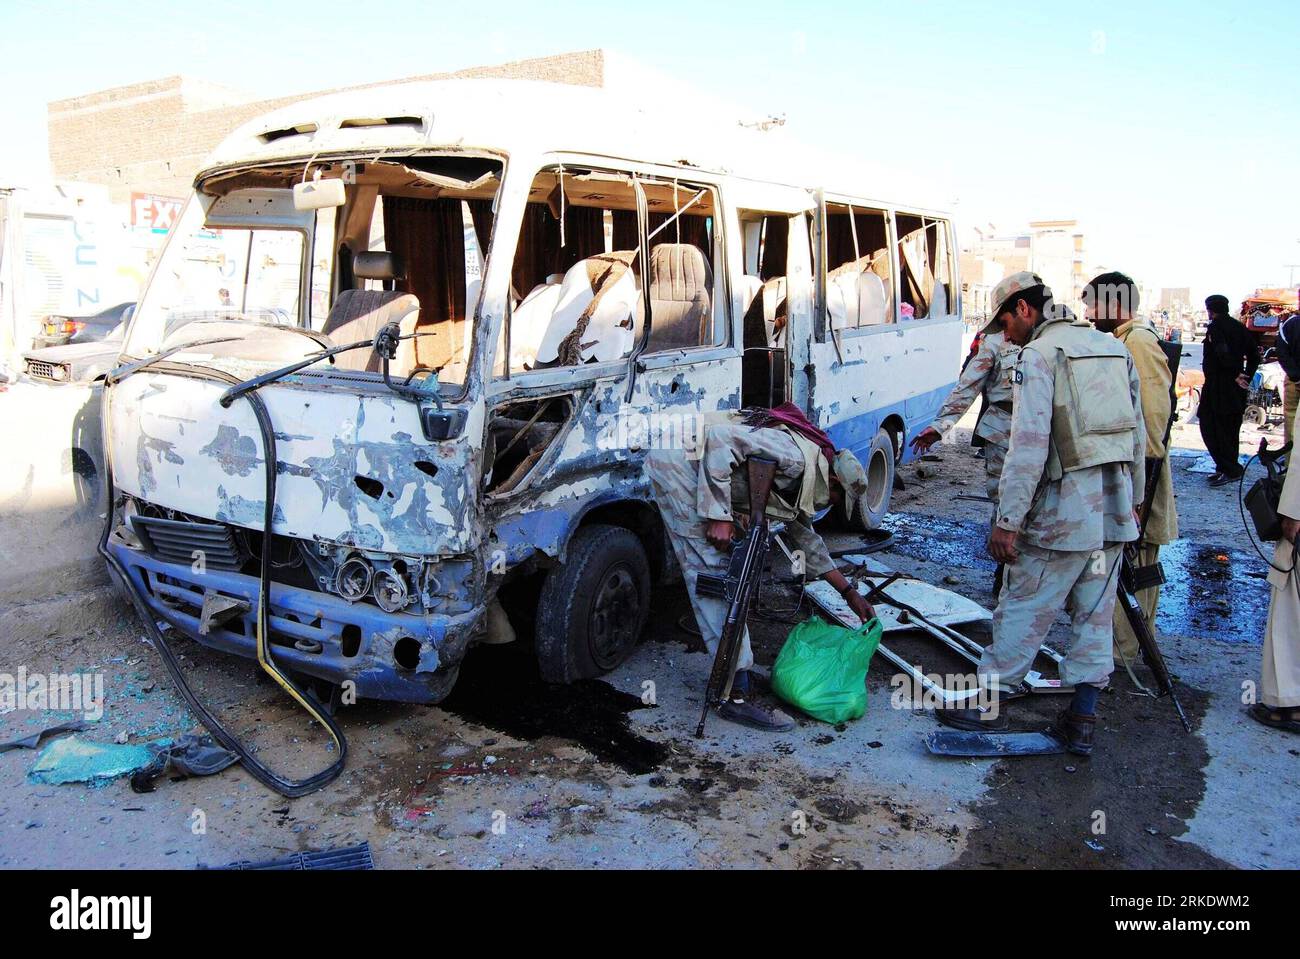 Bildnummer: 55011801  Datum: 10.03.2011  Copyright: imago/Xinhua DERA MURAD JAMALI, March 10, 2011 (Xinhua) -- Security members inspect the bus destroyed in roadside blast in southwest Pakistan s Dera Murad Jamali, on March 10, 2011. At least one was killed and 14 others injured in a blast that occurred Thursday afternoon in Pakistan s southwest province of Balochistan, reported local Urdu TV channel Geo. (Xinhua/Iqbal Hussain) (lr) PAKISTAN-DERA MURAD JAMALI-BLAST PUBLICATIONxNOTxINxCHN Gesellschaft Anschlag Explosion premiumd kbdig xkg 2011 quer o0 Bus Wrack    Bildnummer 55011801 Date 10 03 Stock Photo